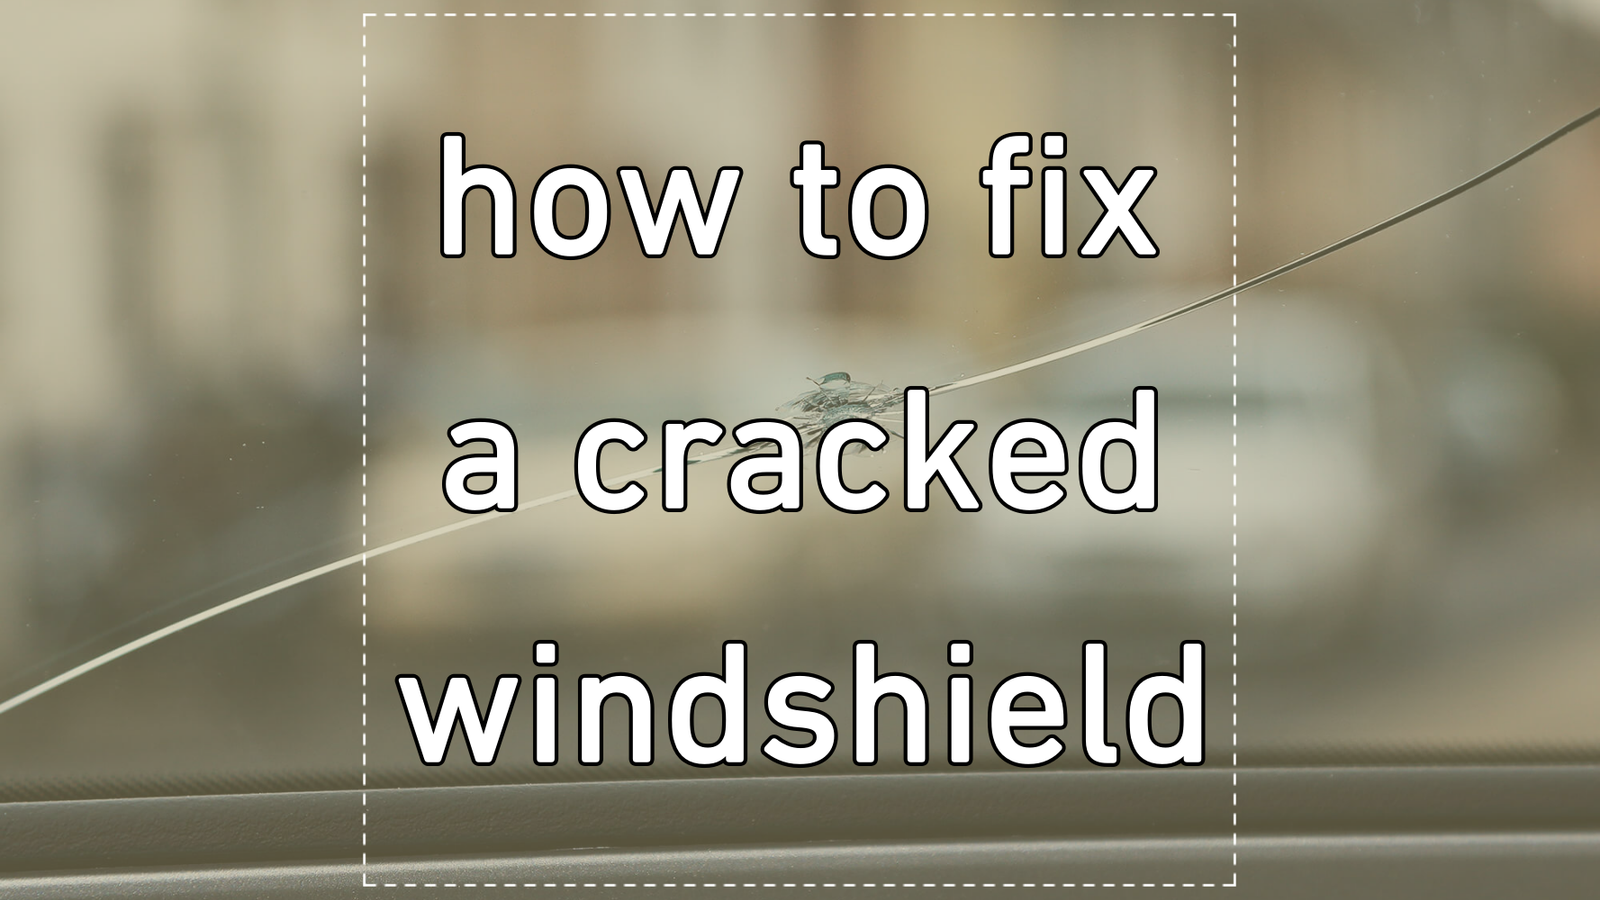 how to fix a cracked windshield